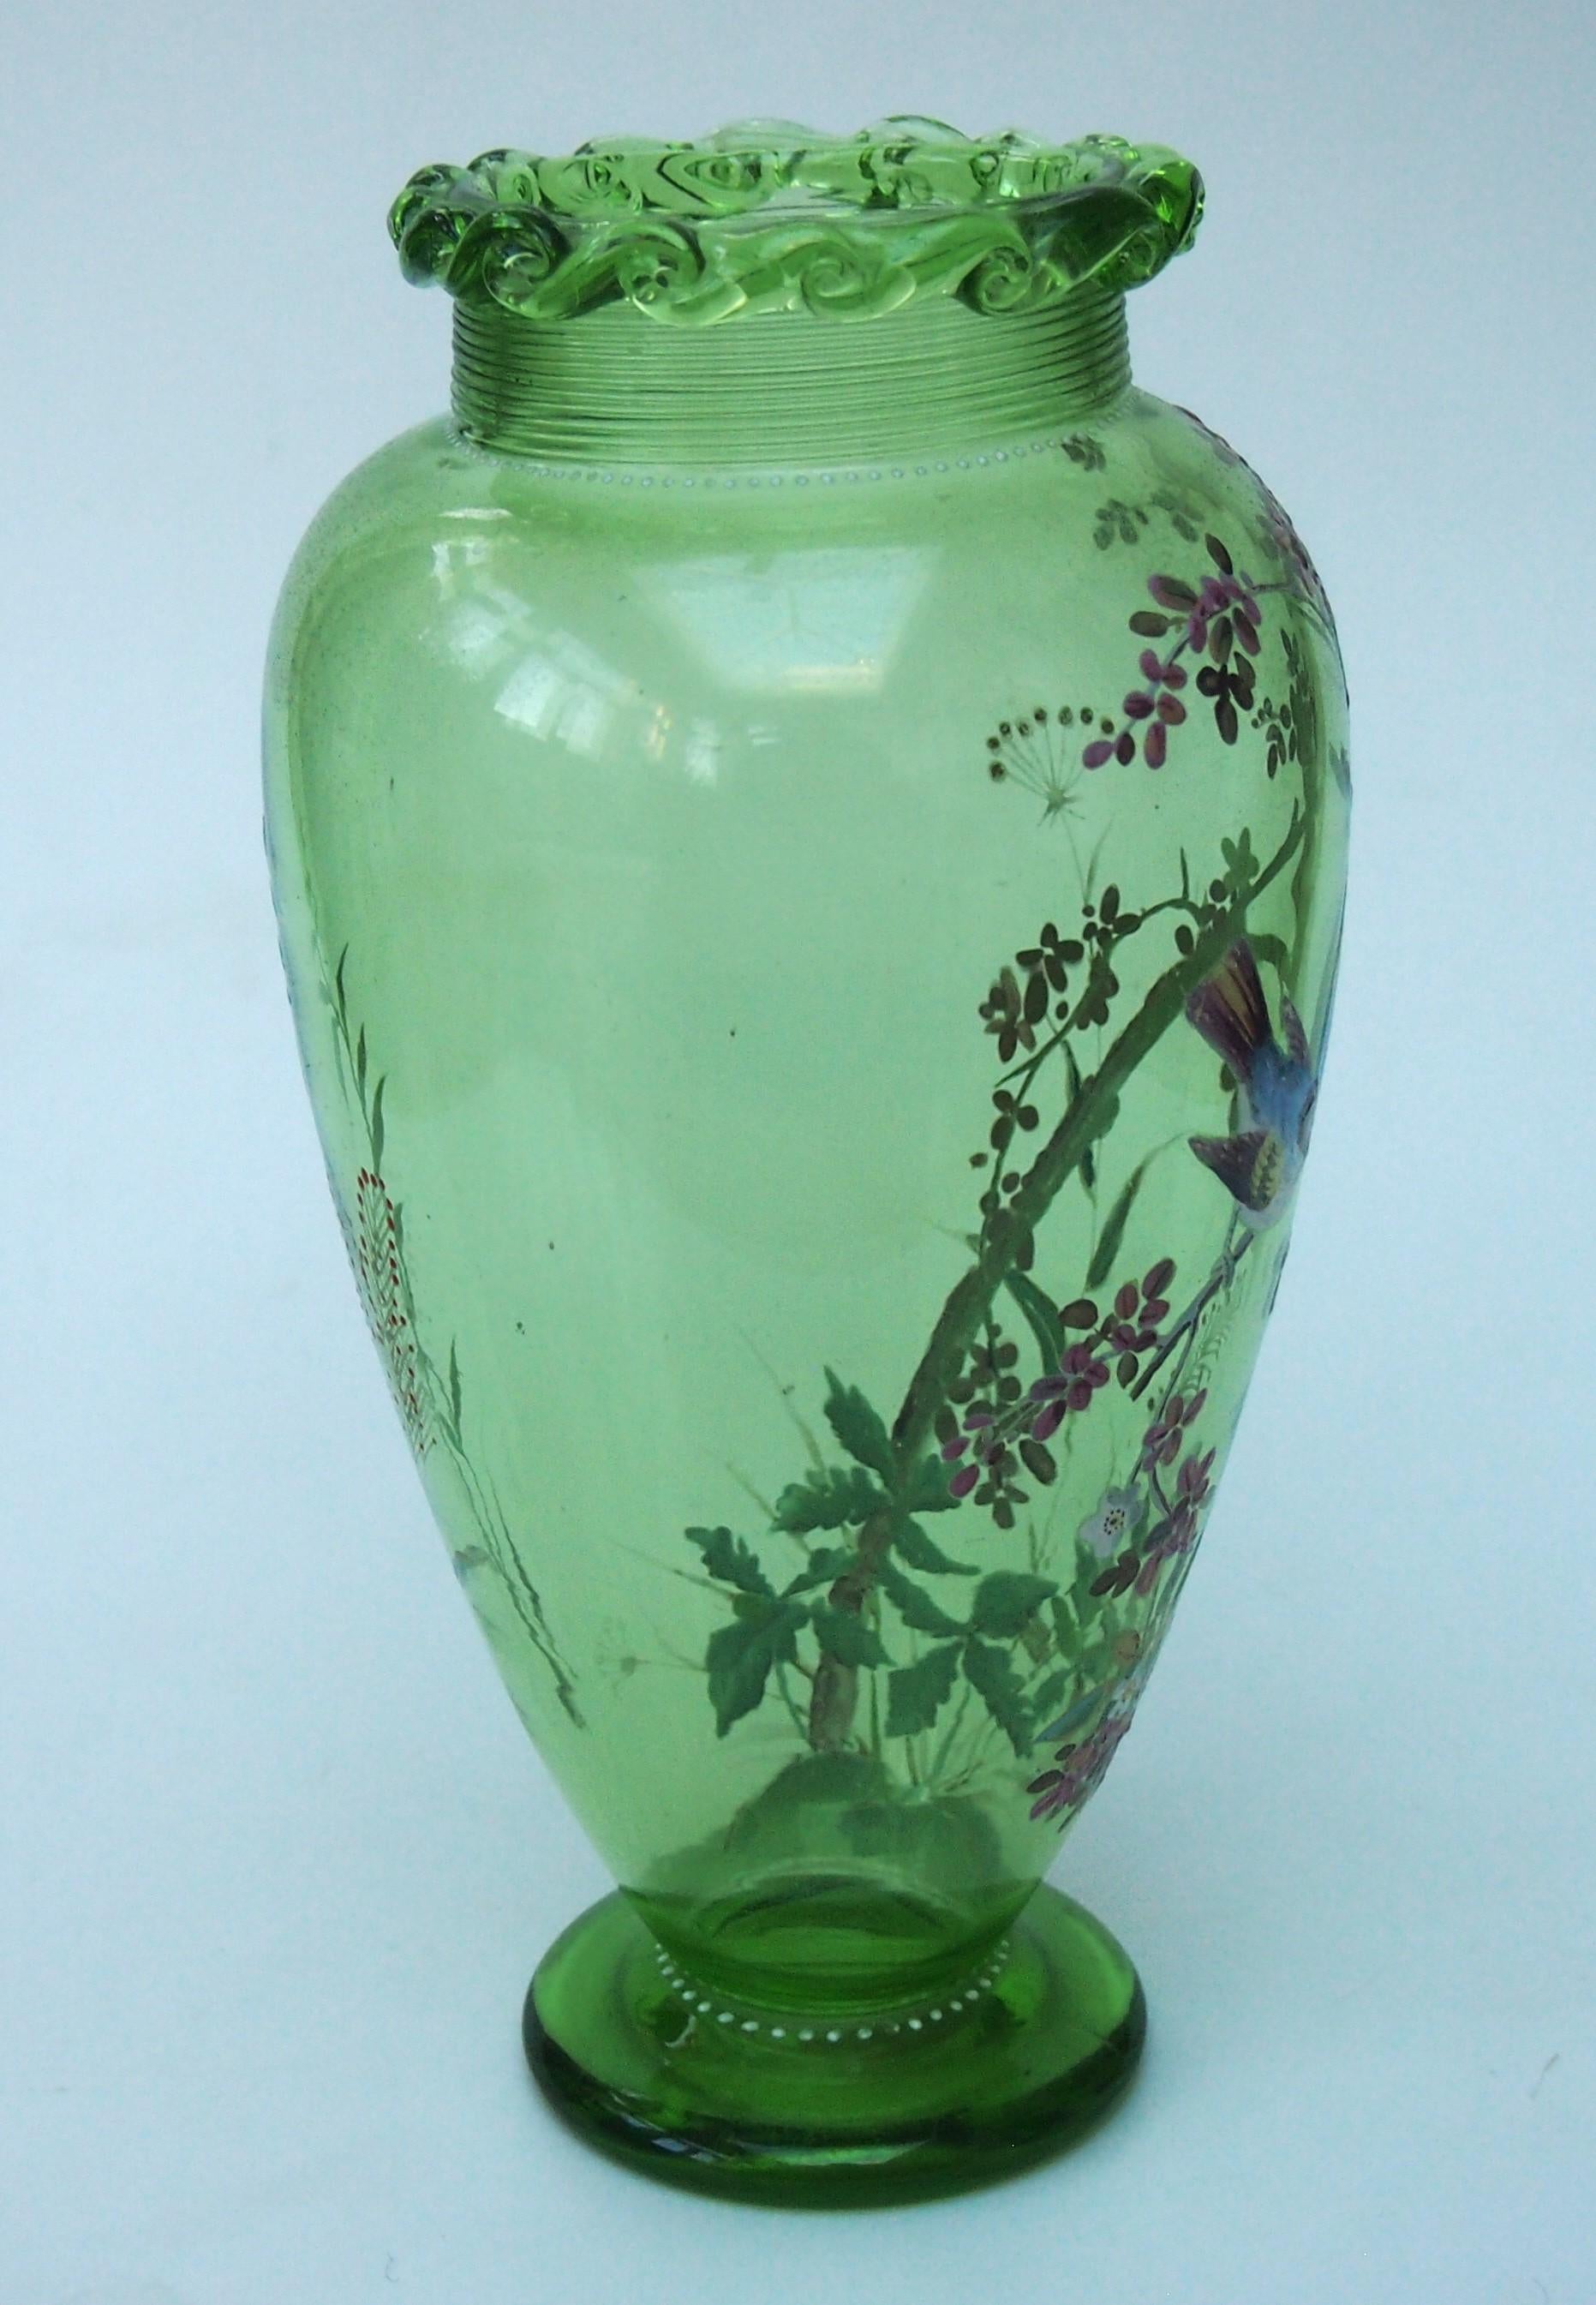 Harrach Glass Vase Decorated with Birds in Branches  c1890 In Good Condition For Sale In Worcester Park, GB